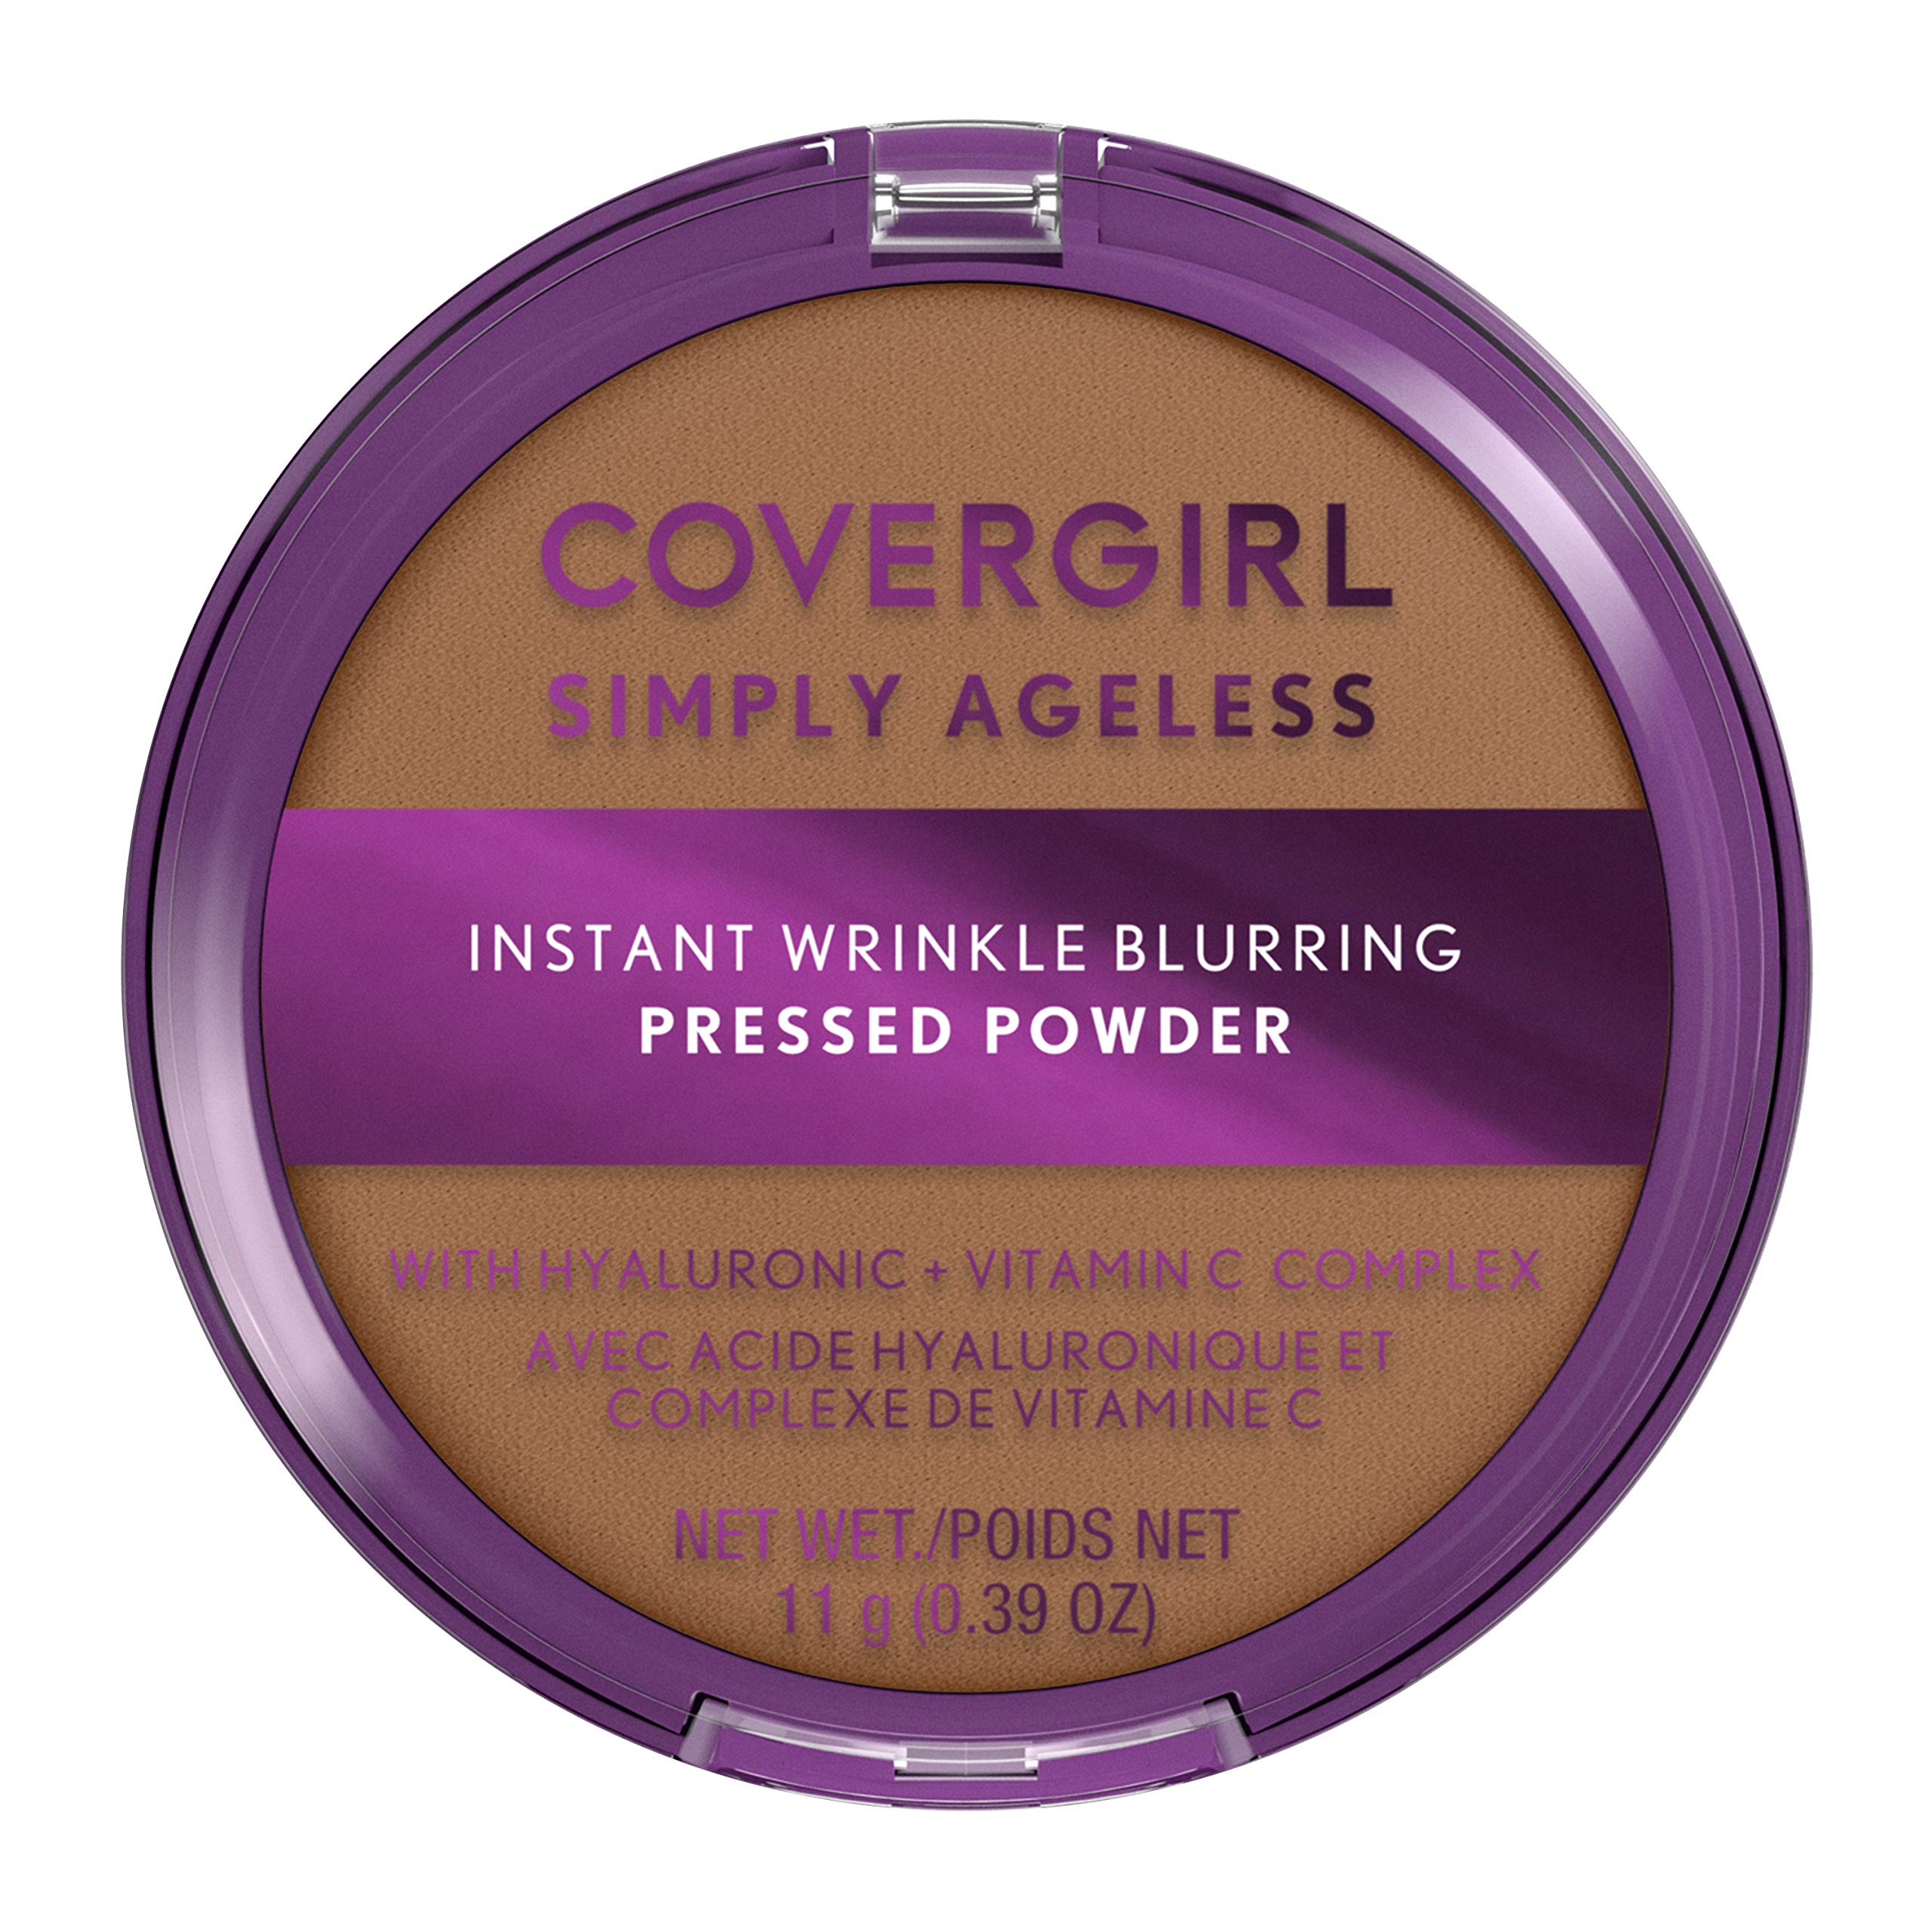 Covergirl Simply Ageless Wrinkle Blurring Pressed Powder Soft Sable #275, 2 Pack (7916665307374)